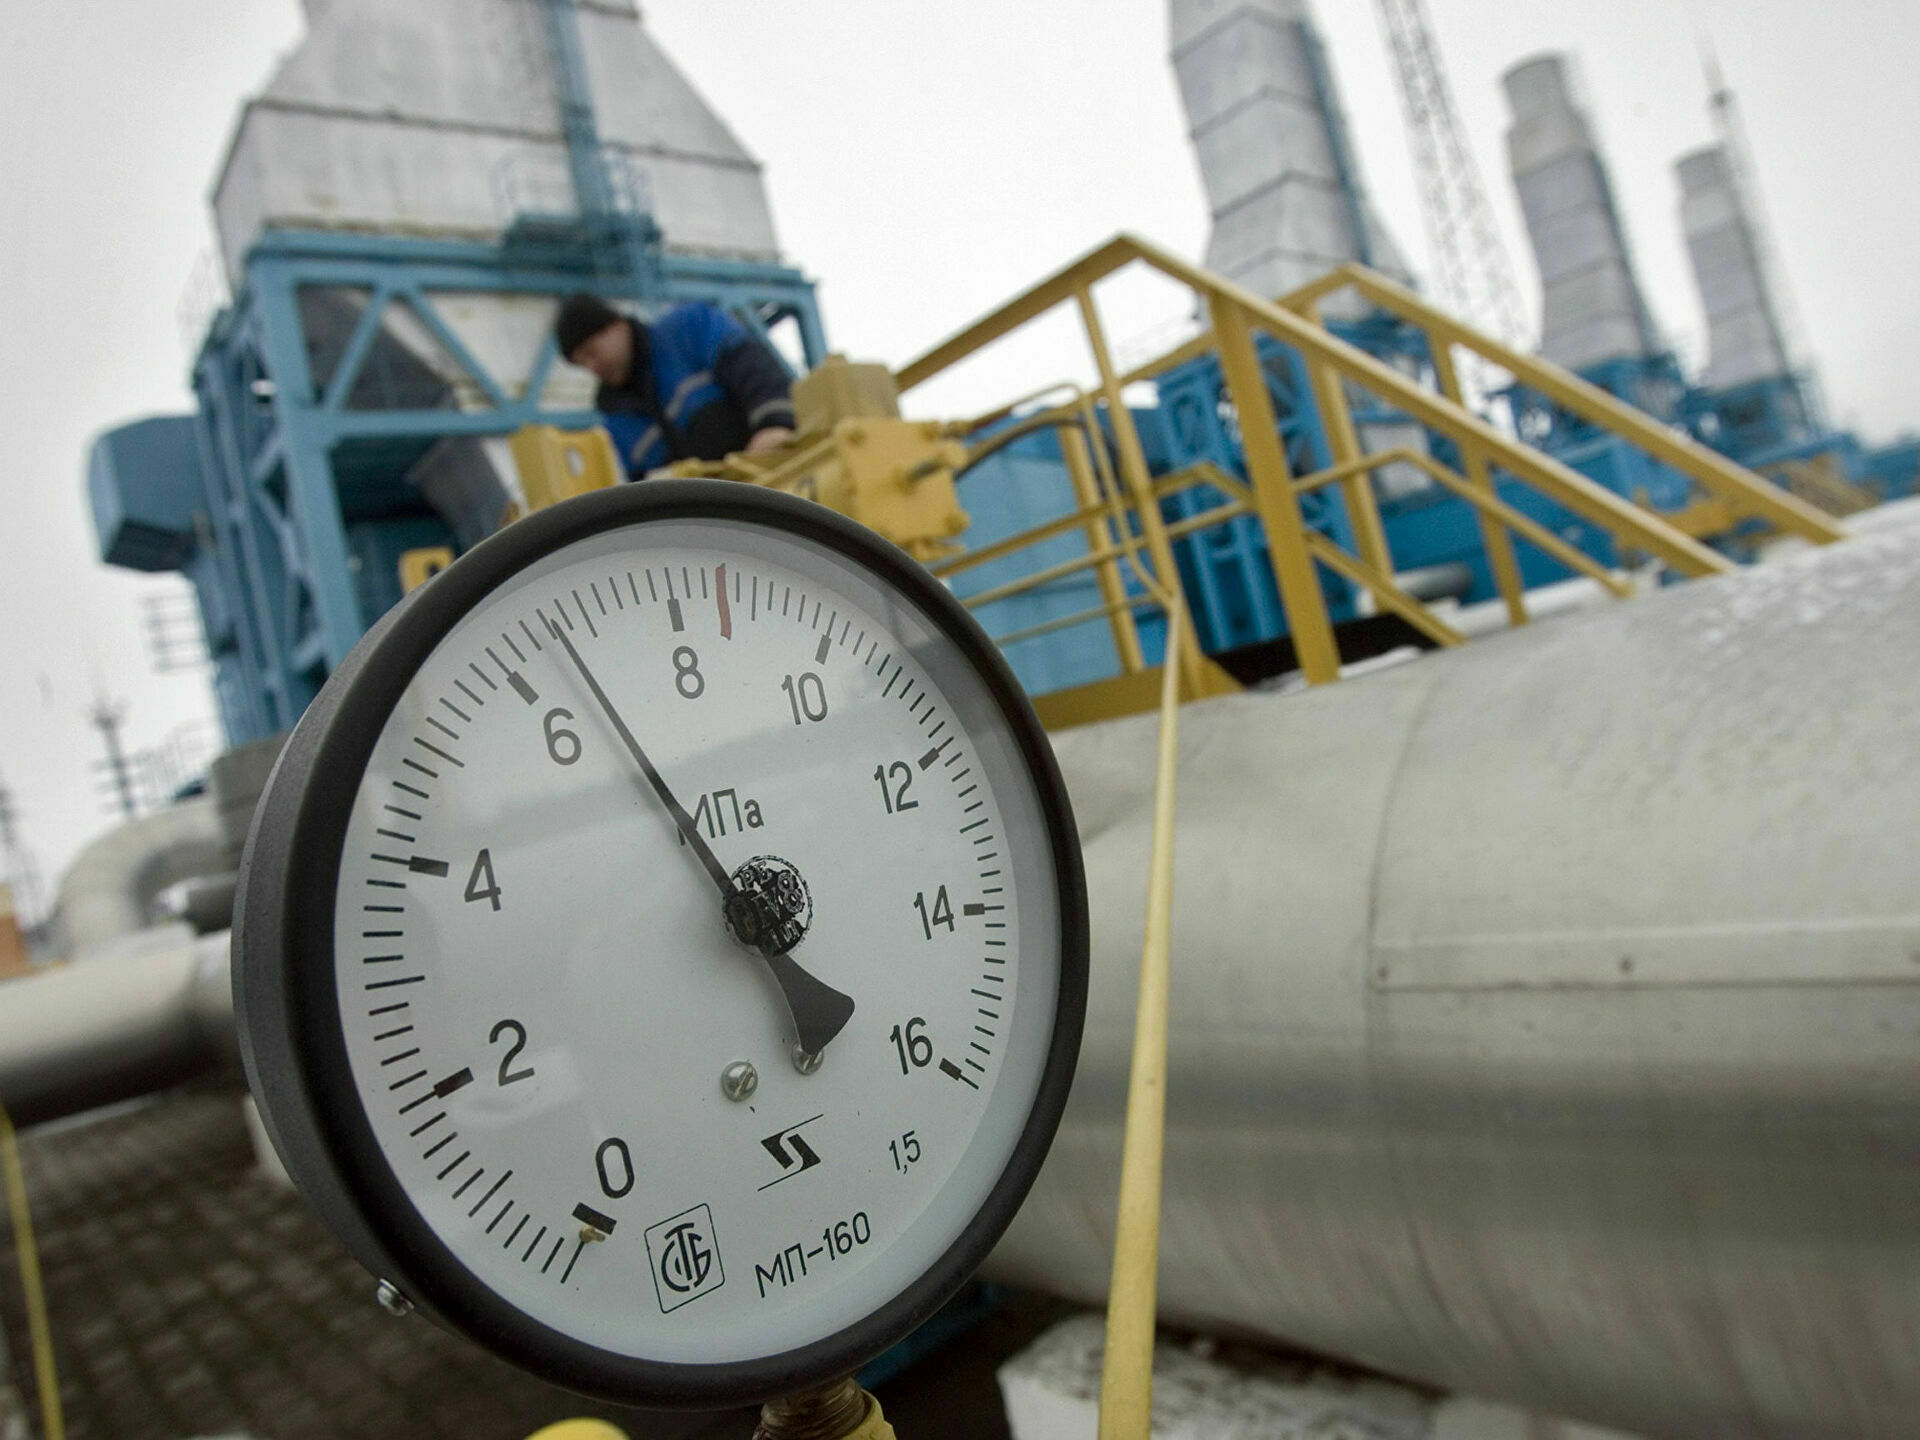 Gazprom has not resumed fuel supplies via the Yamal-Europe pipeline through Poland